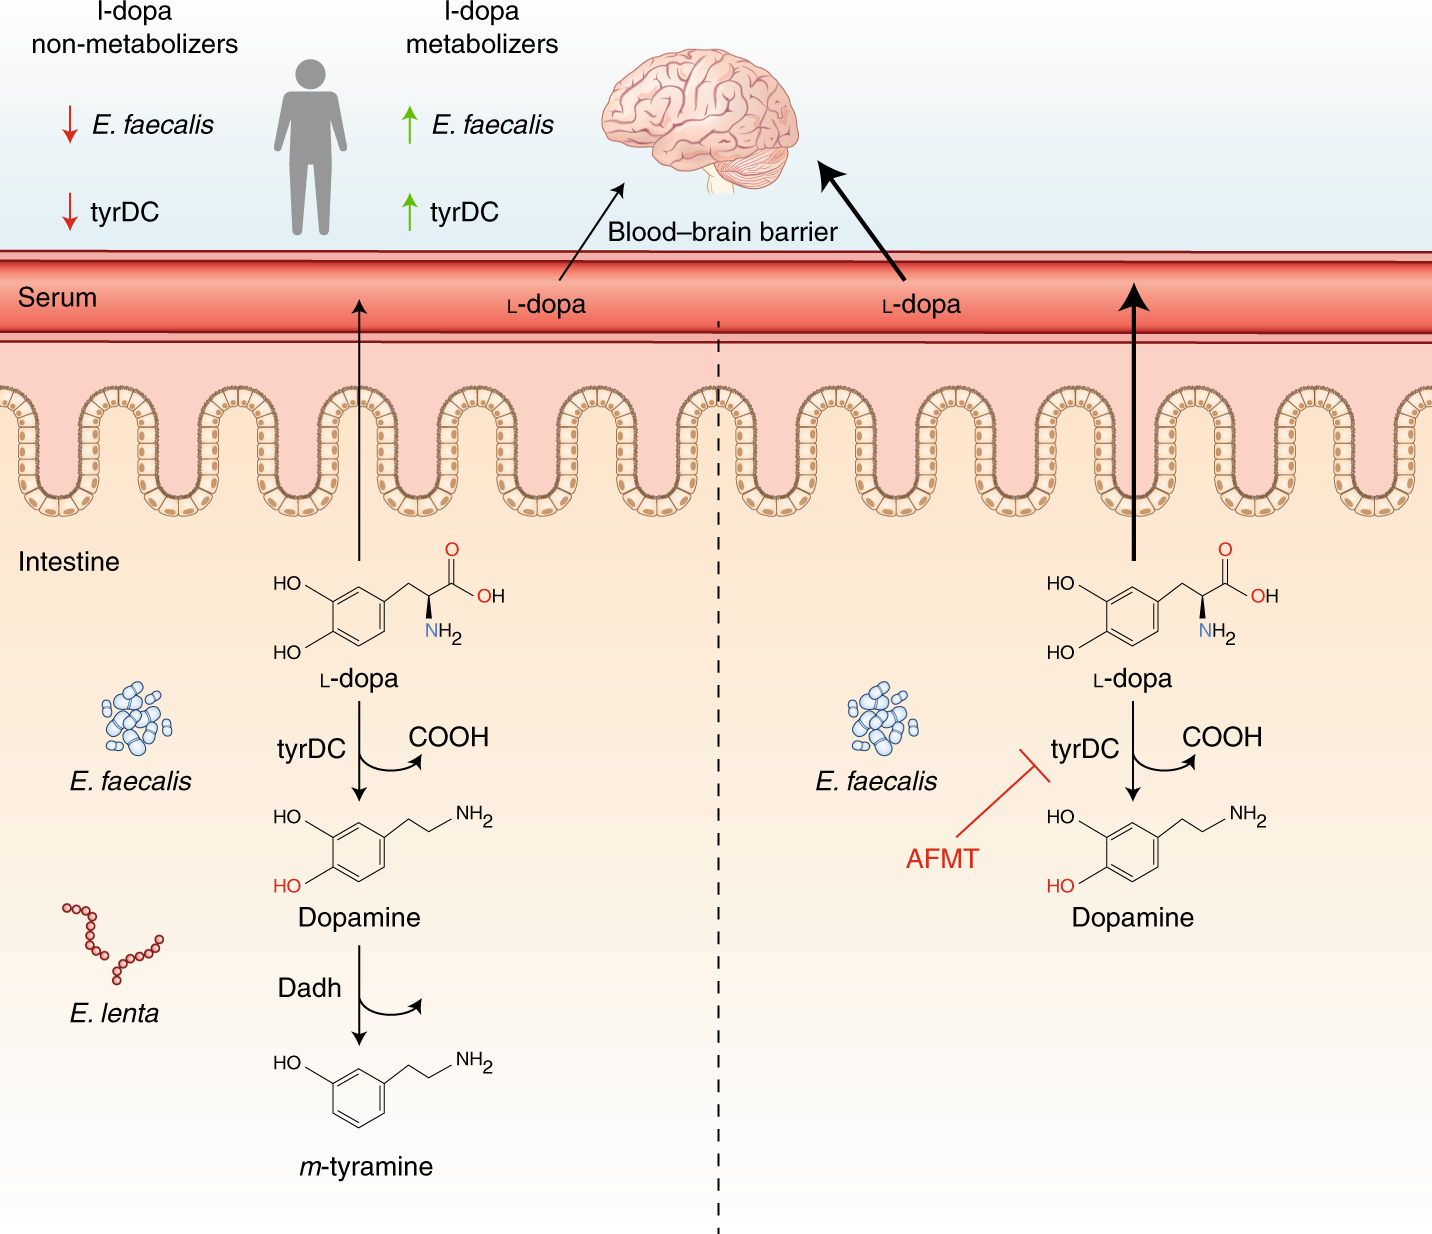 A novel pathway for microbial metabolism of levodopa | Nature Medicine